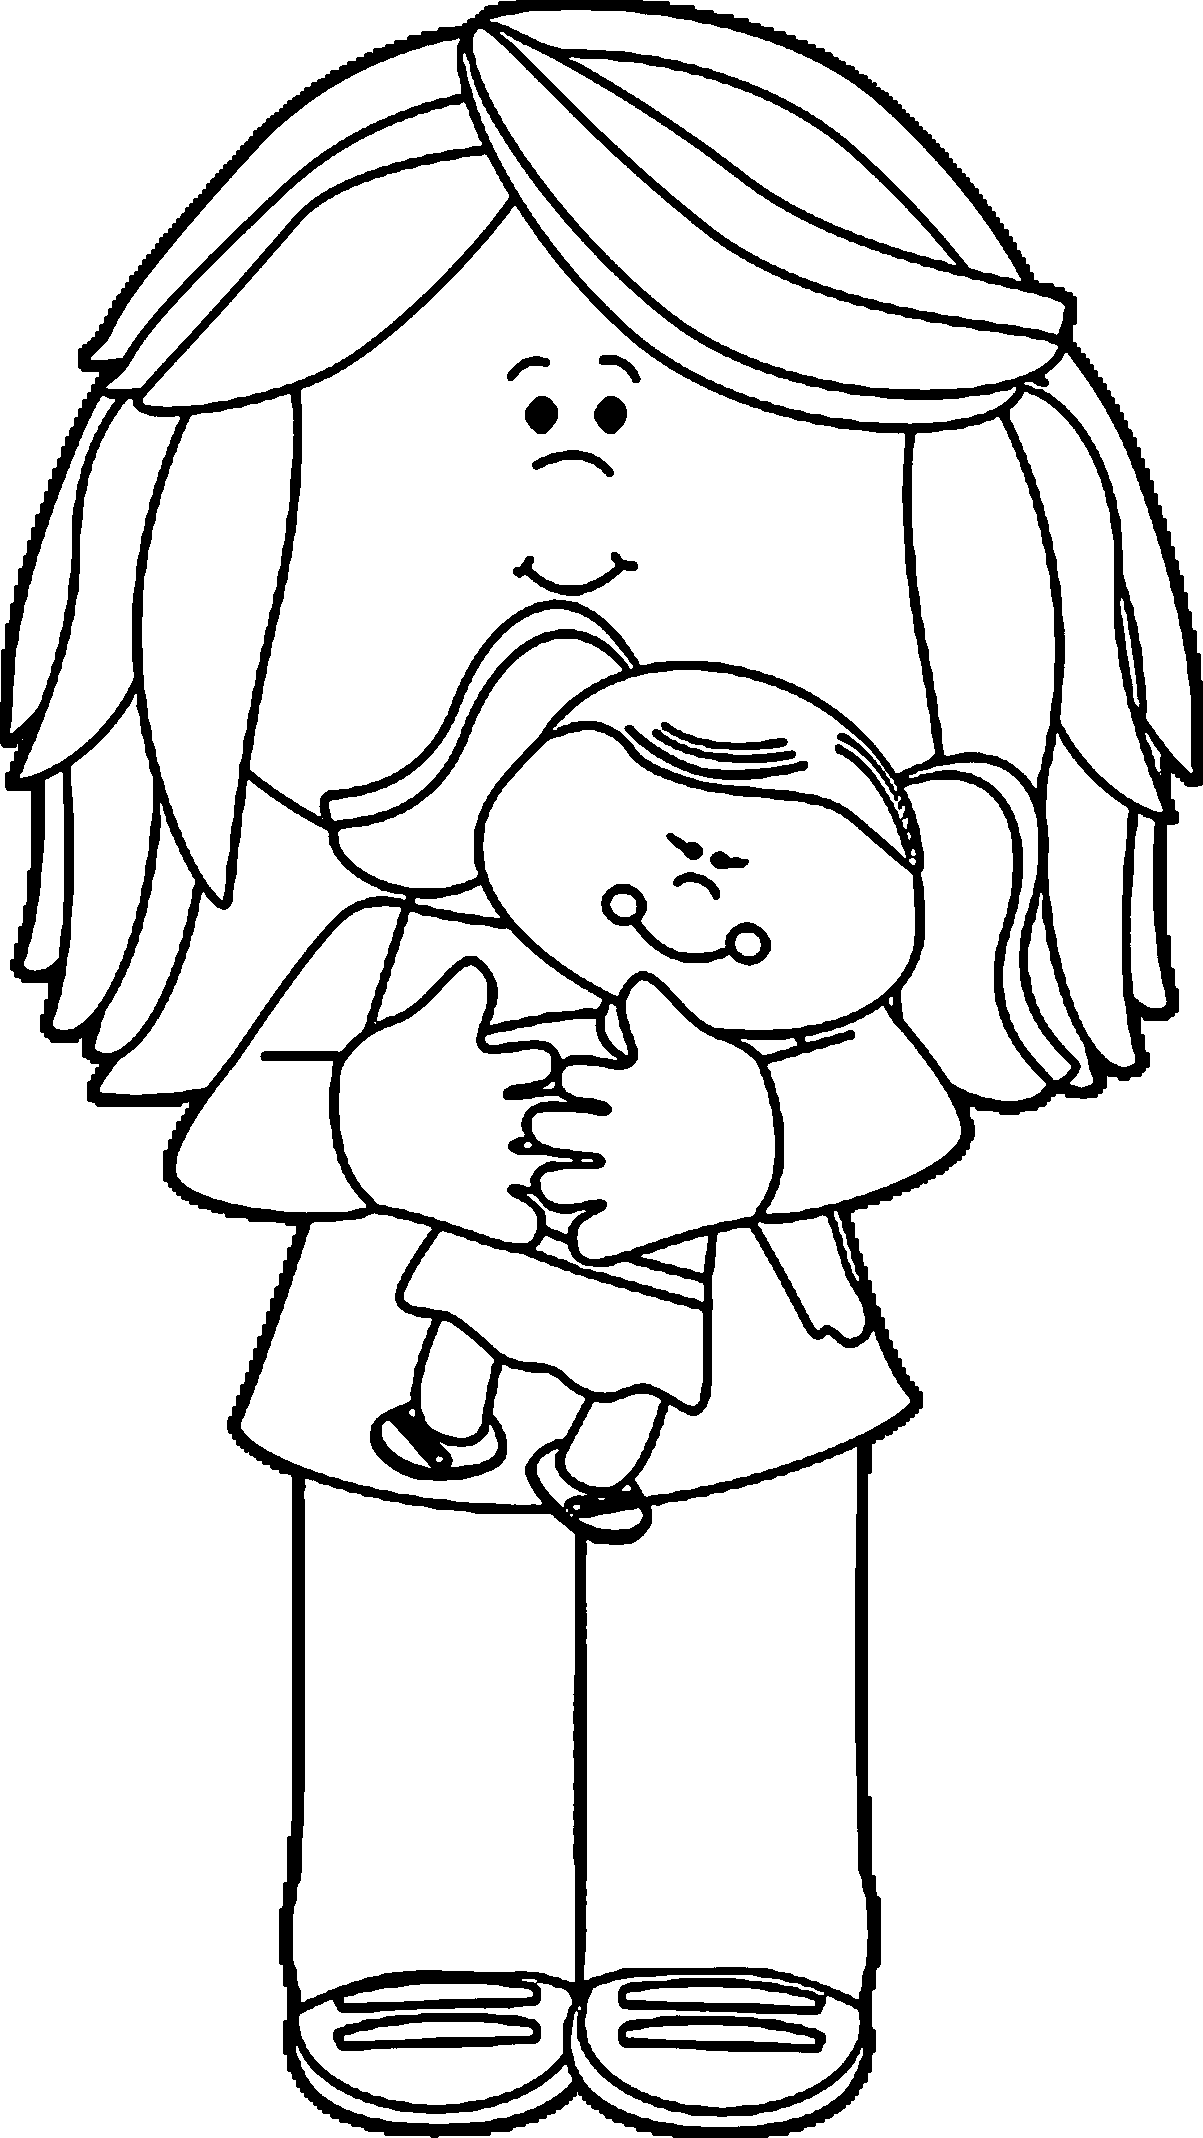 Download Girl Holding Doll Coloring Pages - Coloring Home